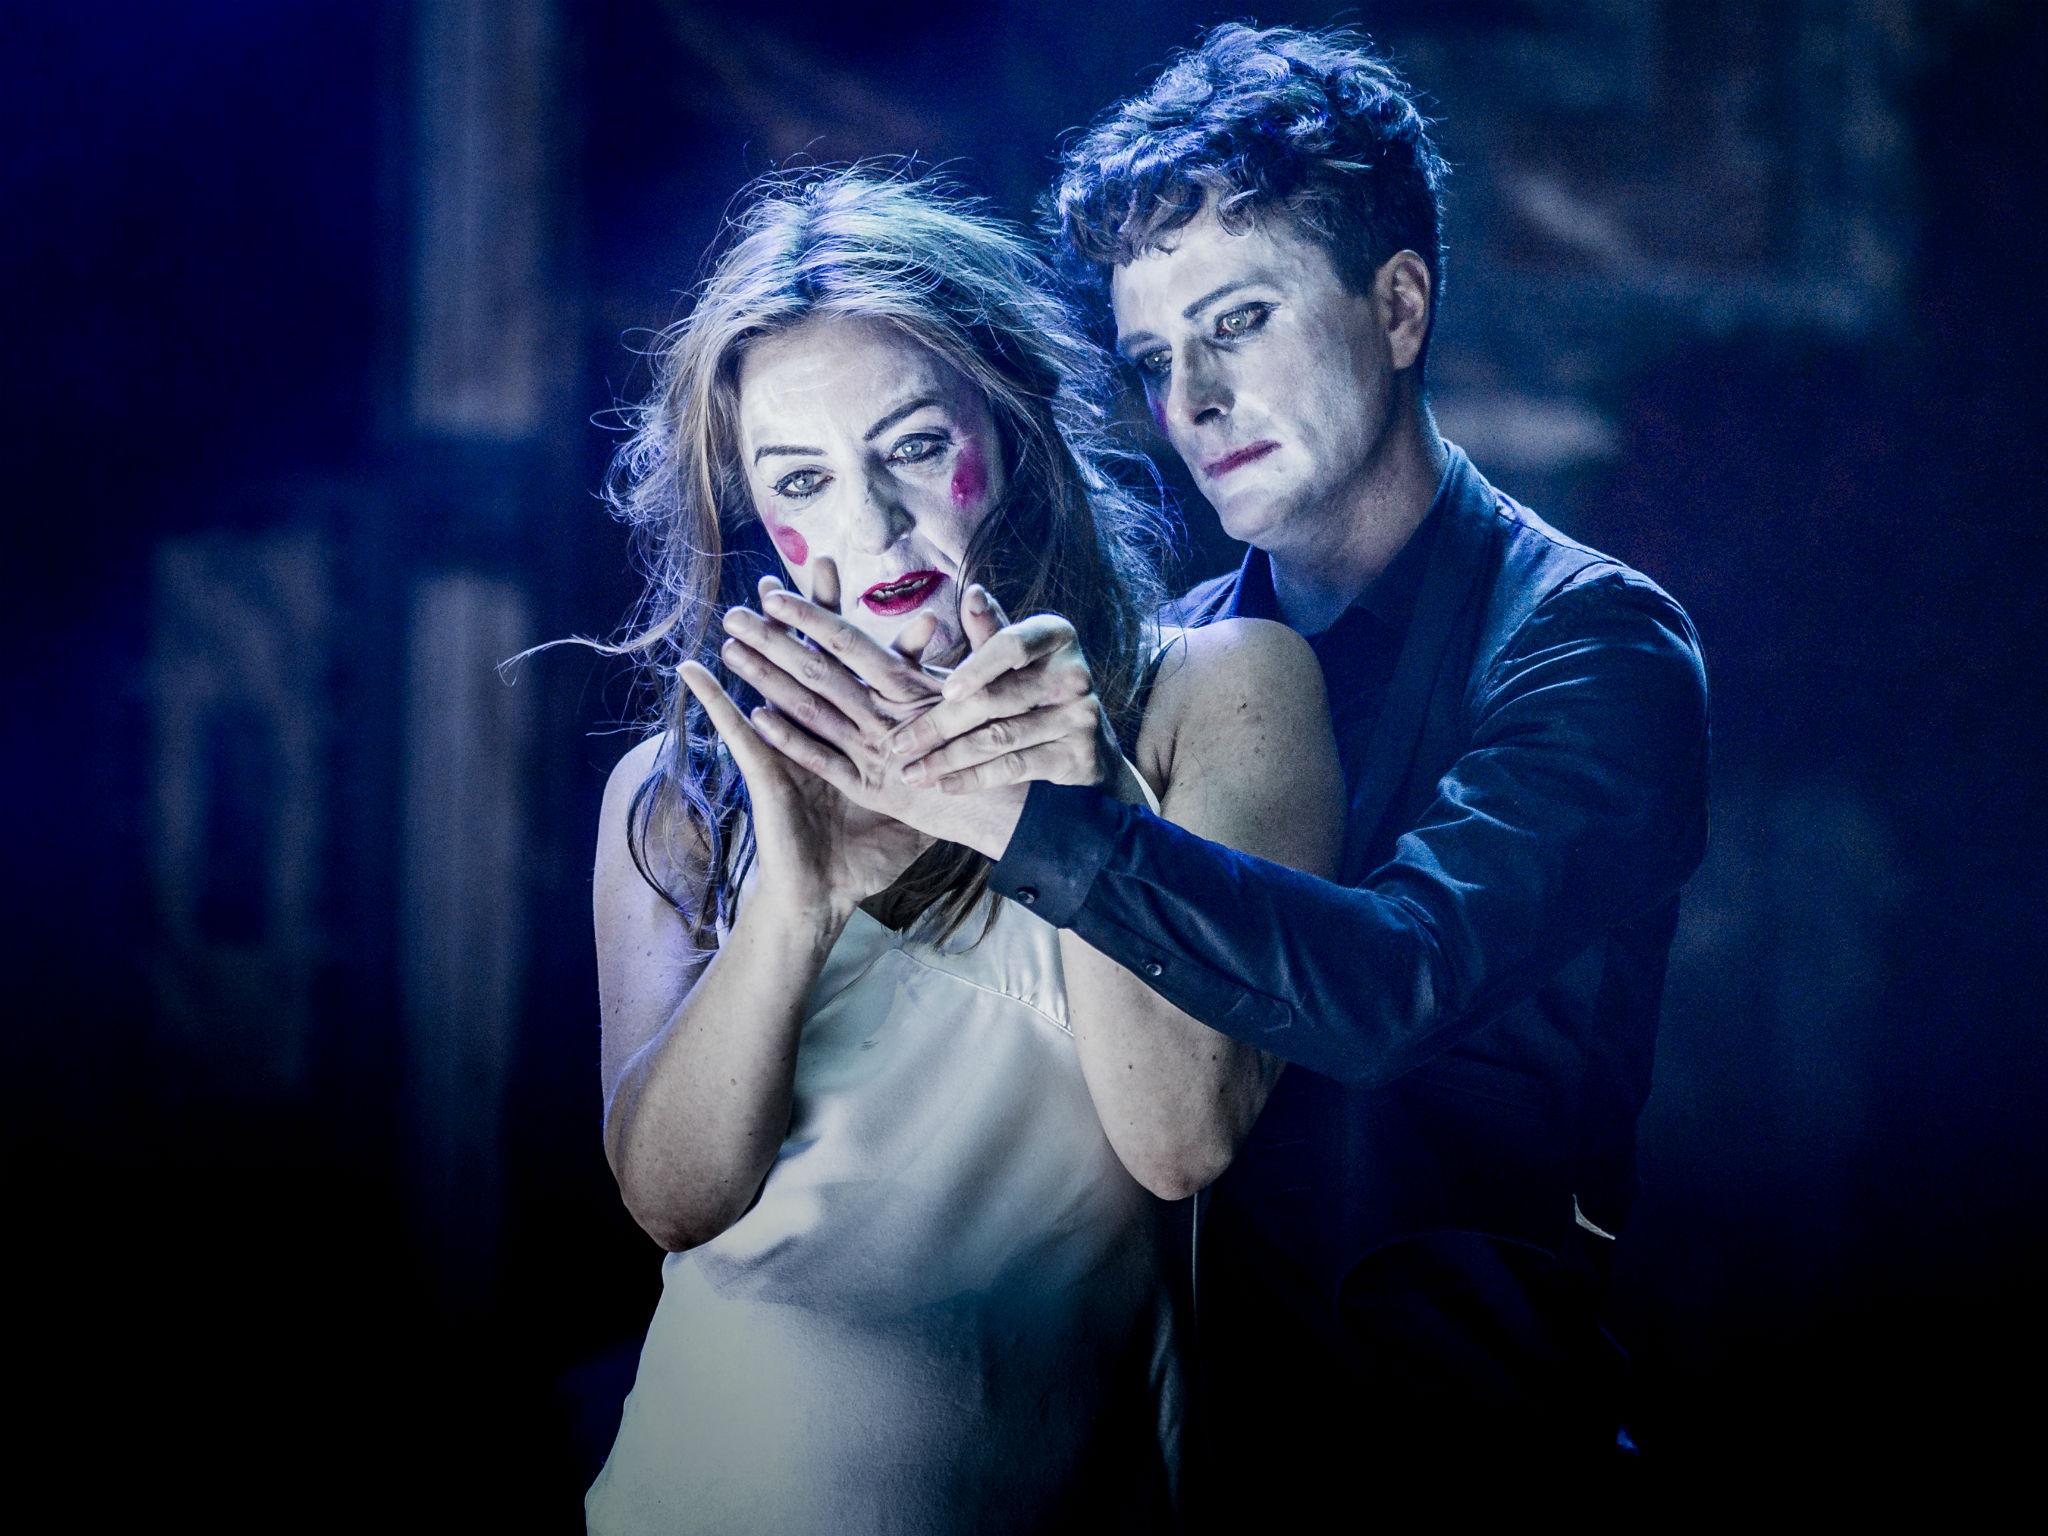 Kirsty Bushell as Juliet and Edward Hogg as Romeo in 'Romeo and Juliet' at the Globe